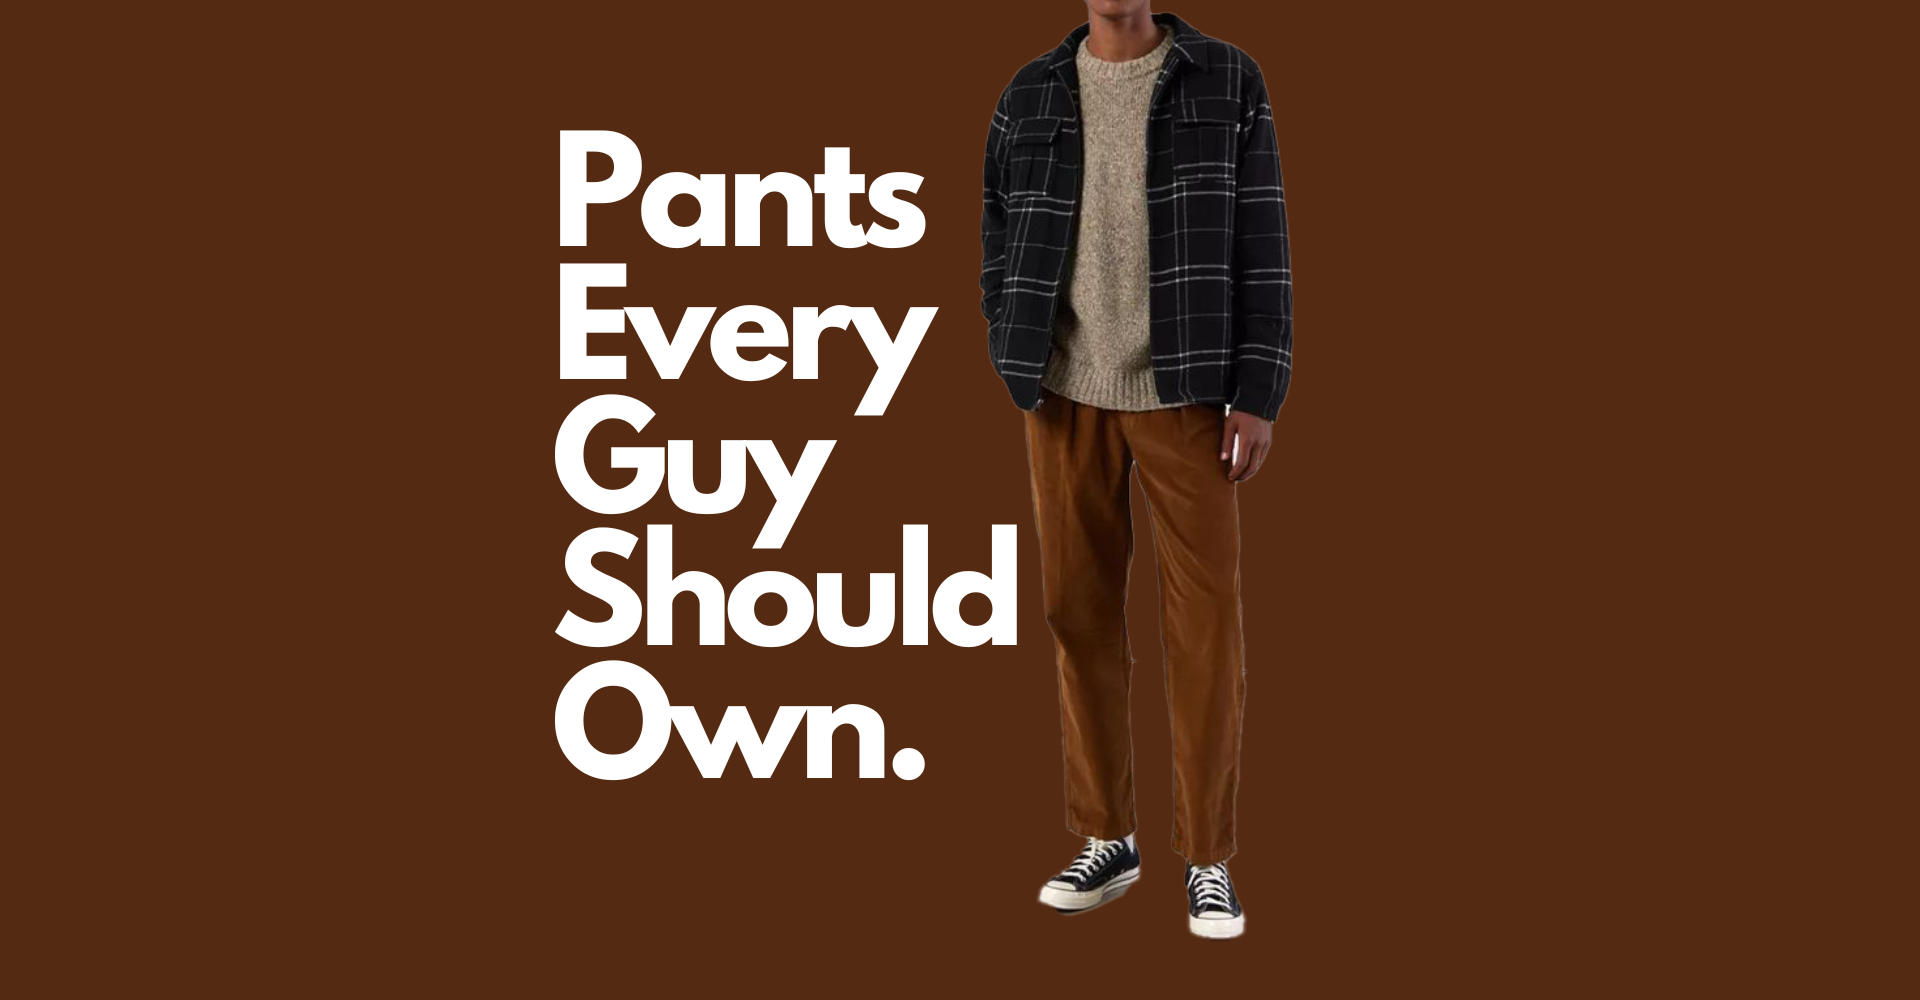 One of the most versatile pants you could ever own and comes in